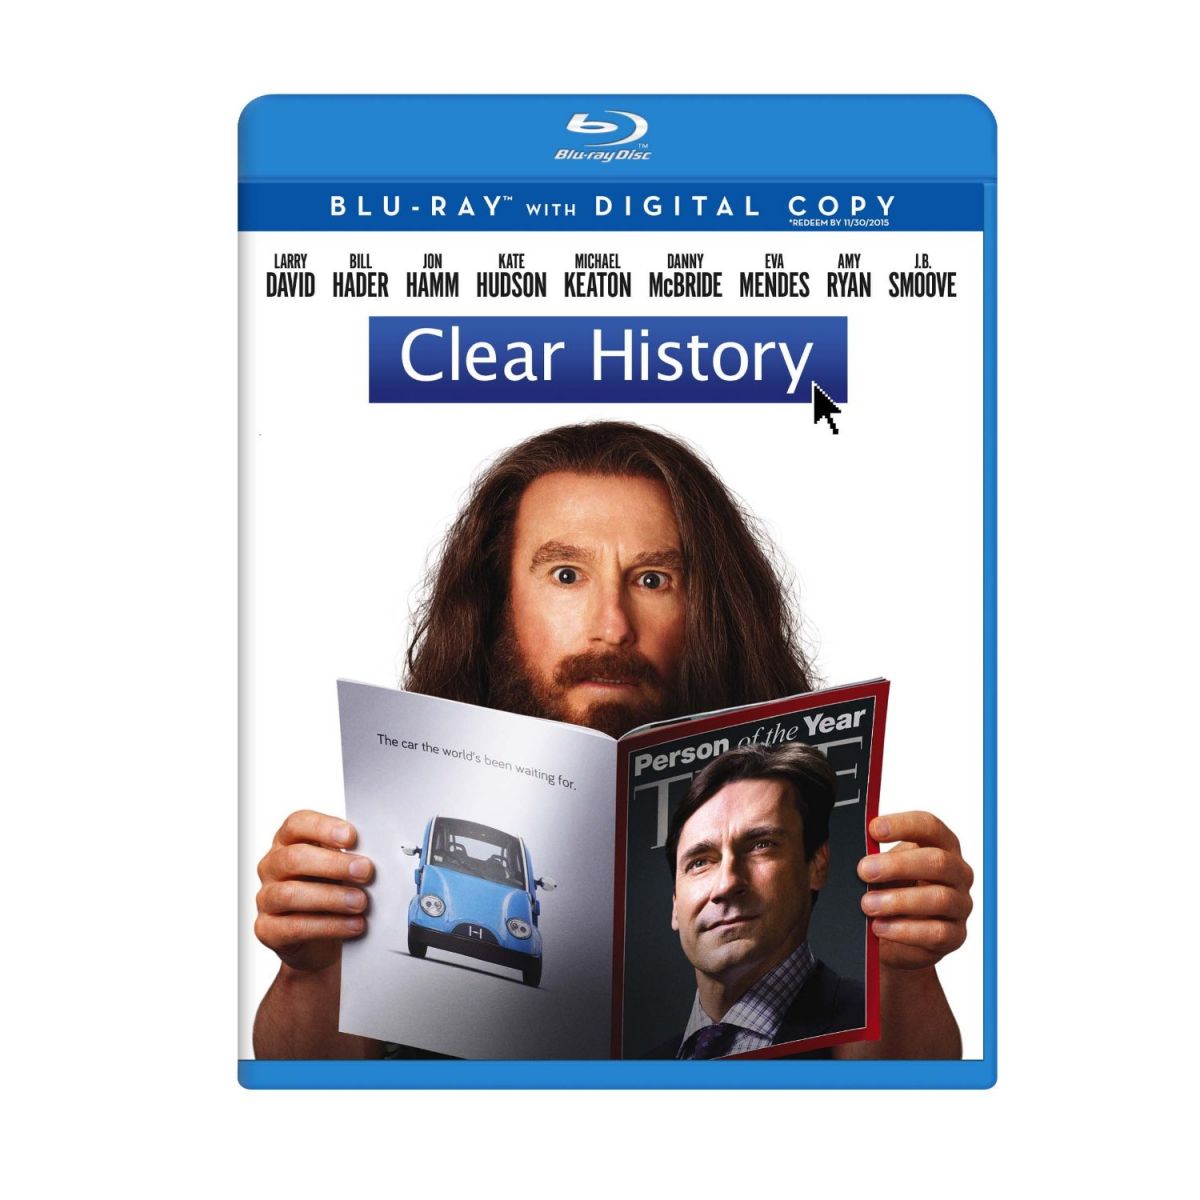 Clearhistory